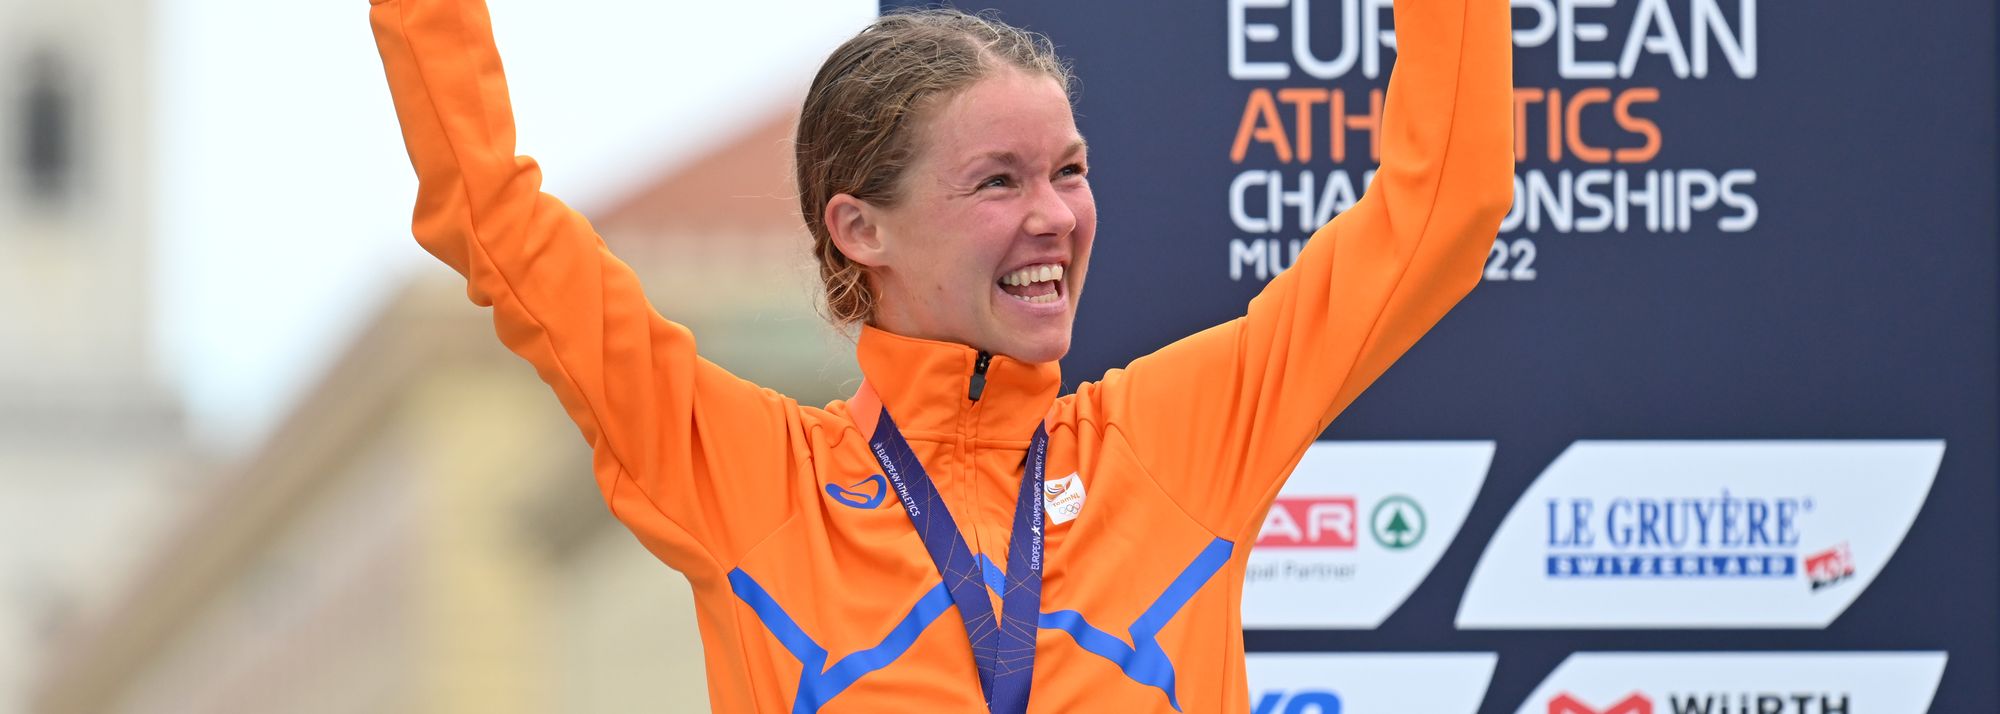 Nienke Brinkman has had a seismic impact on the marathon event in a short space of time